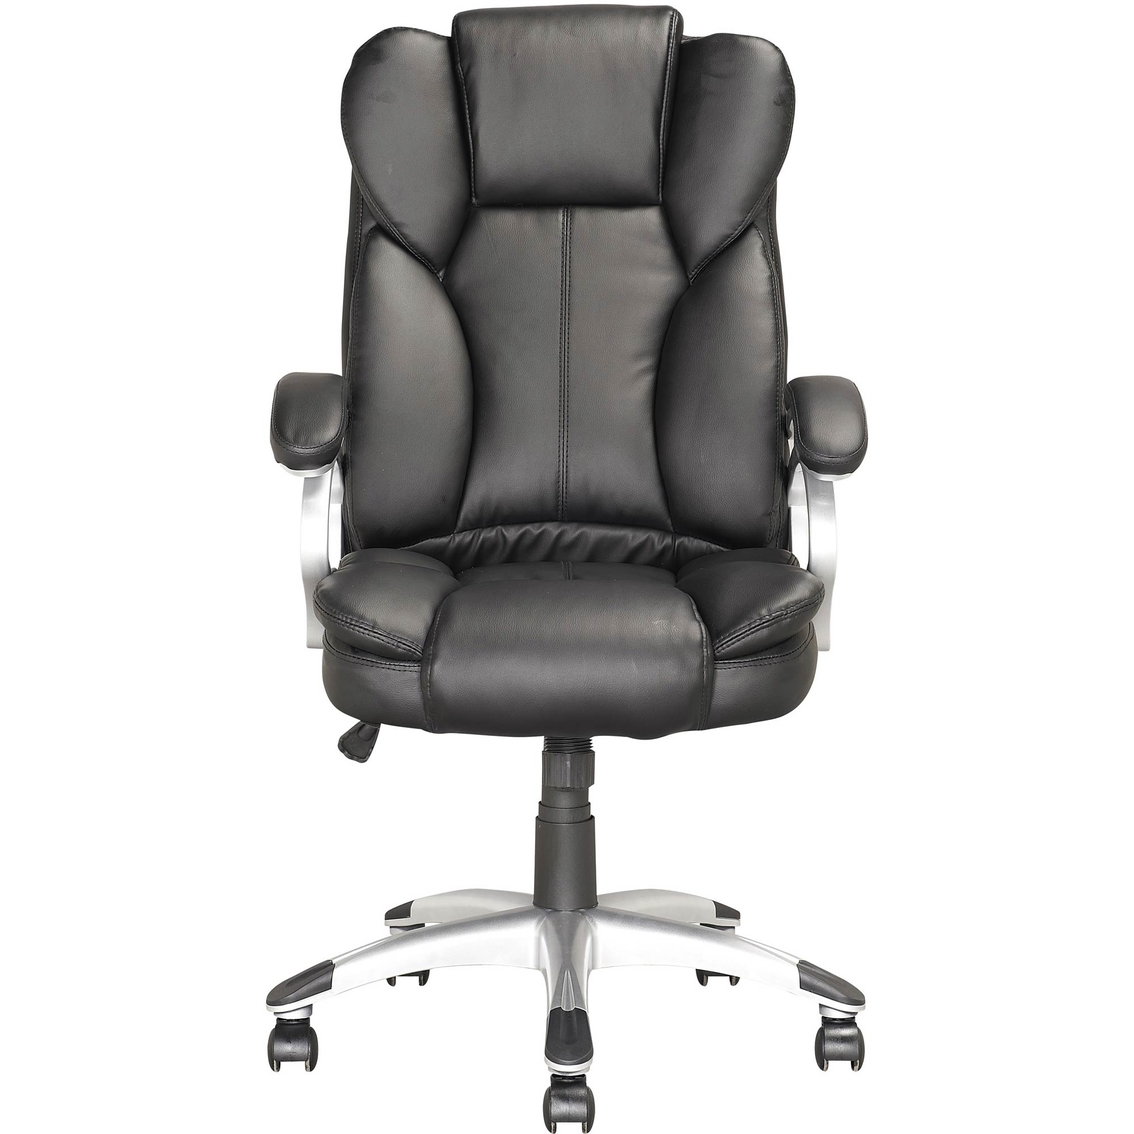 CorLiving Leatherette Executive Office Chair - Image 3 of 4